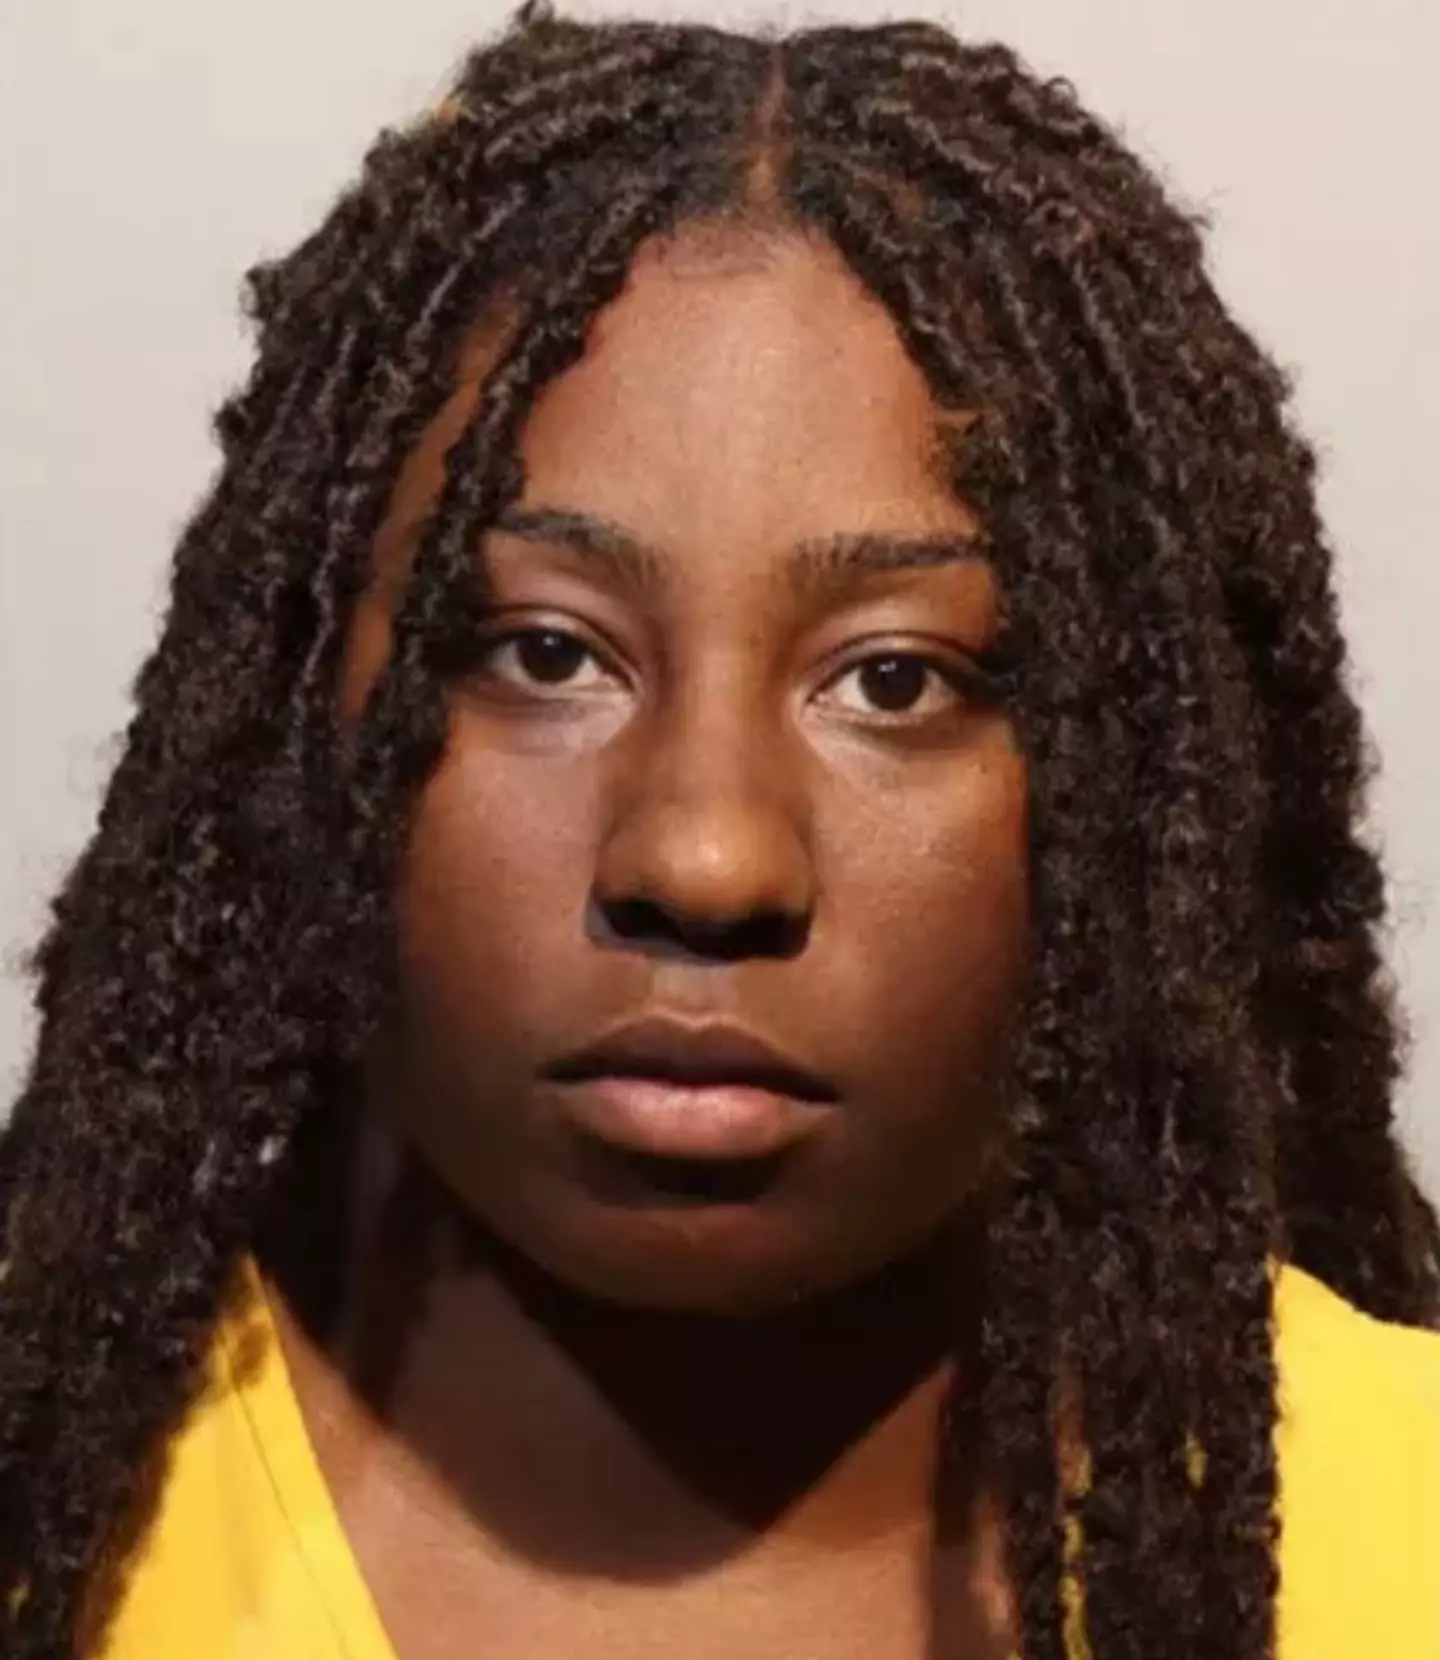 Alicia Moore was arrested after allegedly shoplifting from a mall.